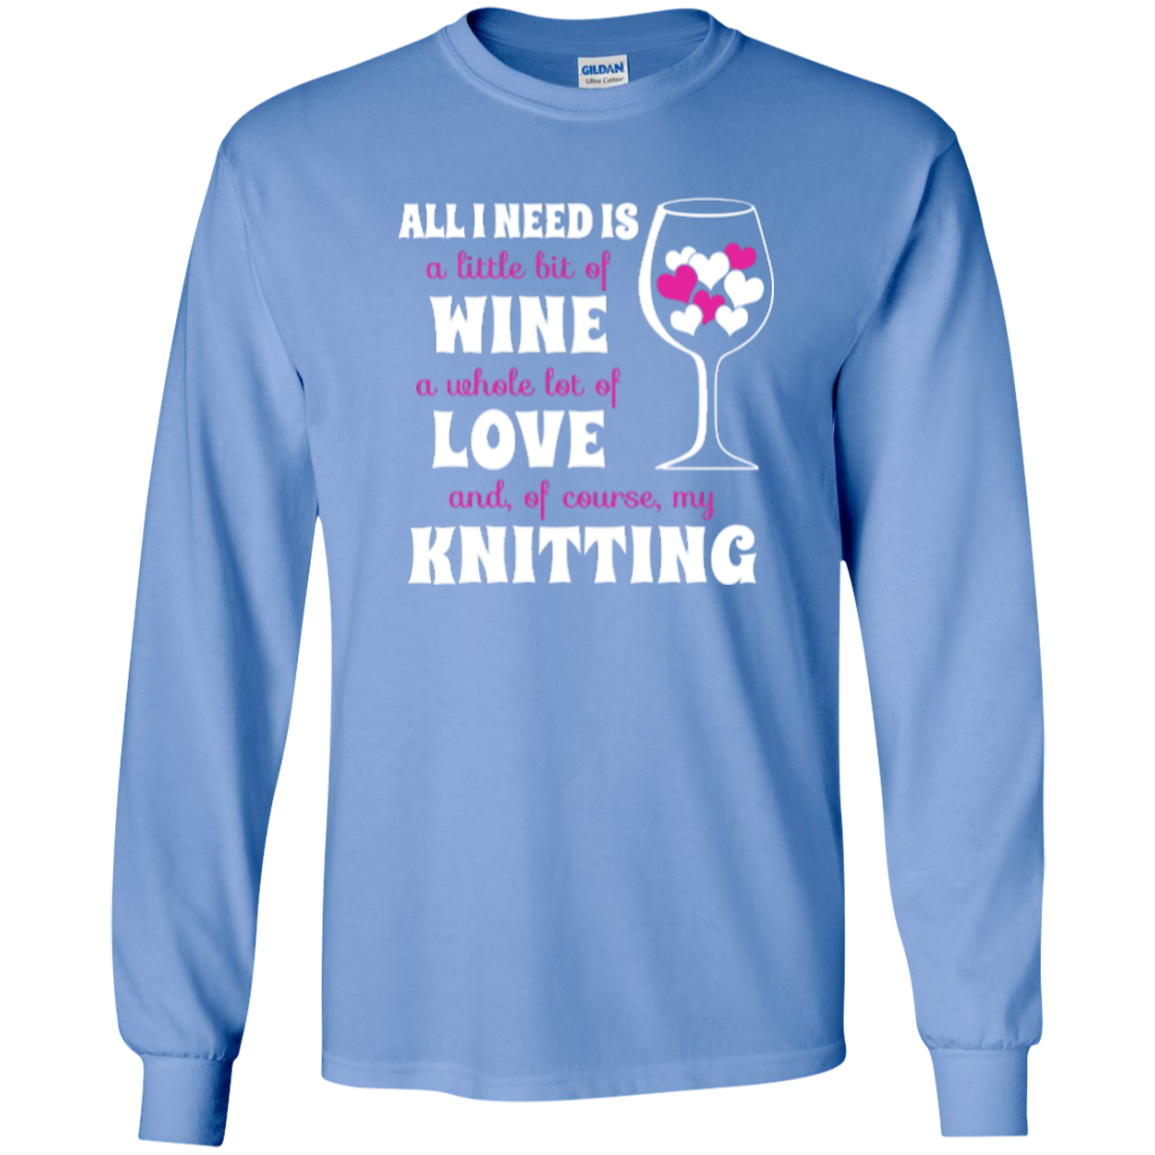 All I Need is Wine-Love-Knitting Long Sleeve Ultra Cotton Tshirt - Crafter4Life - 9